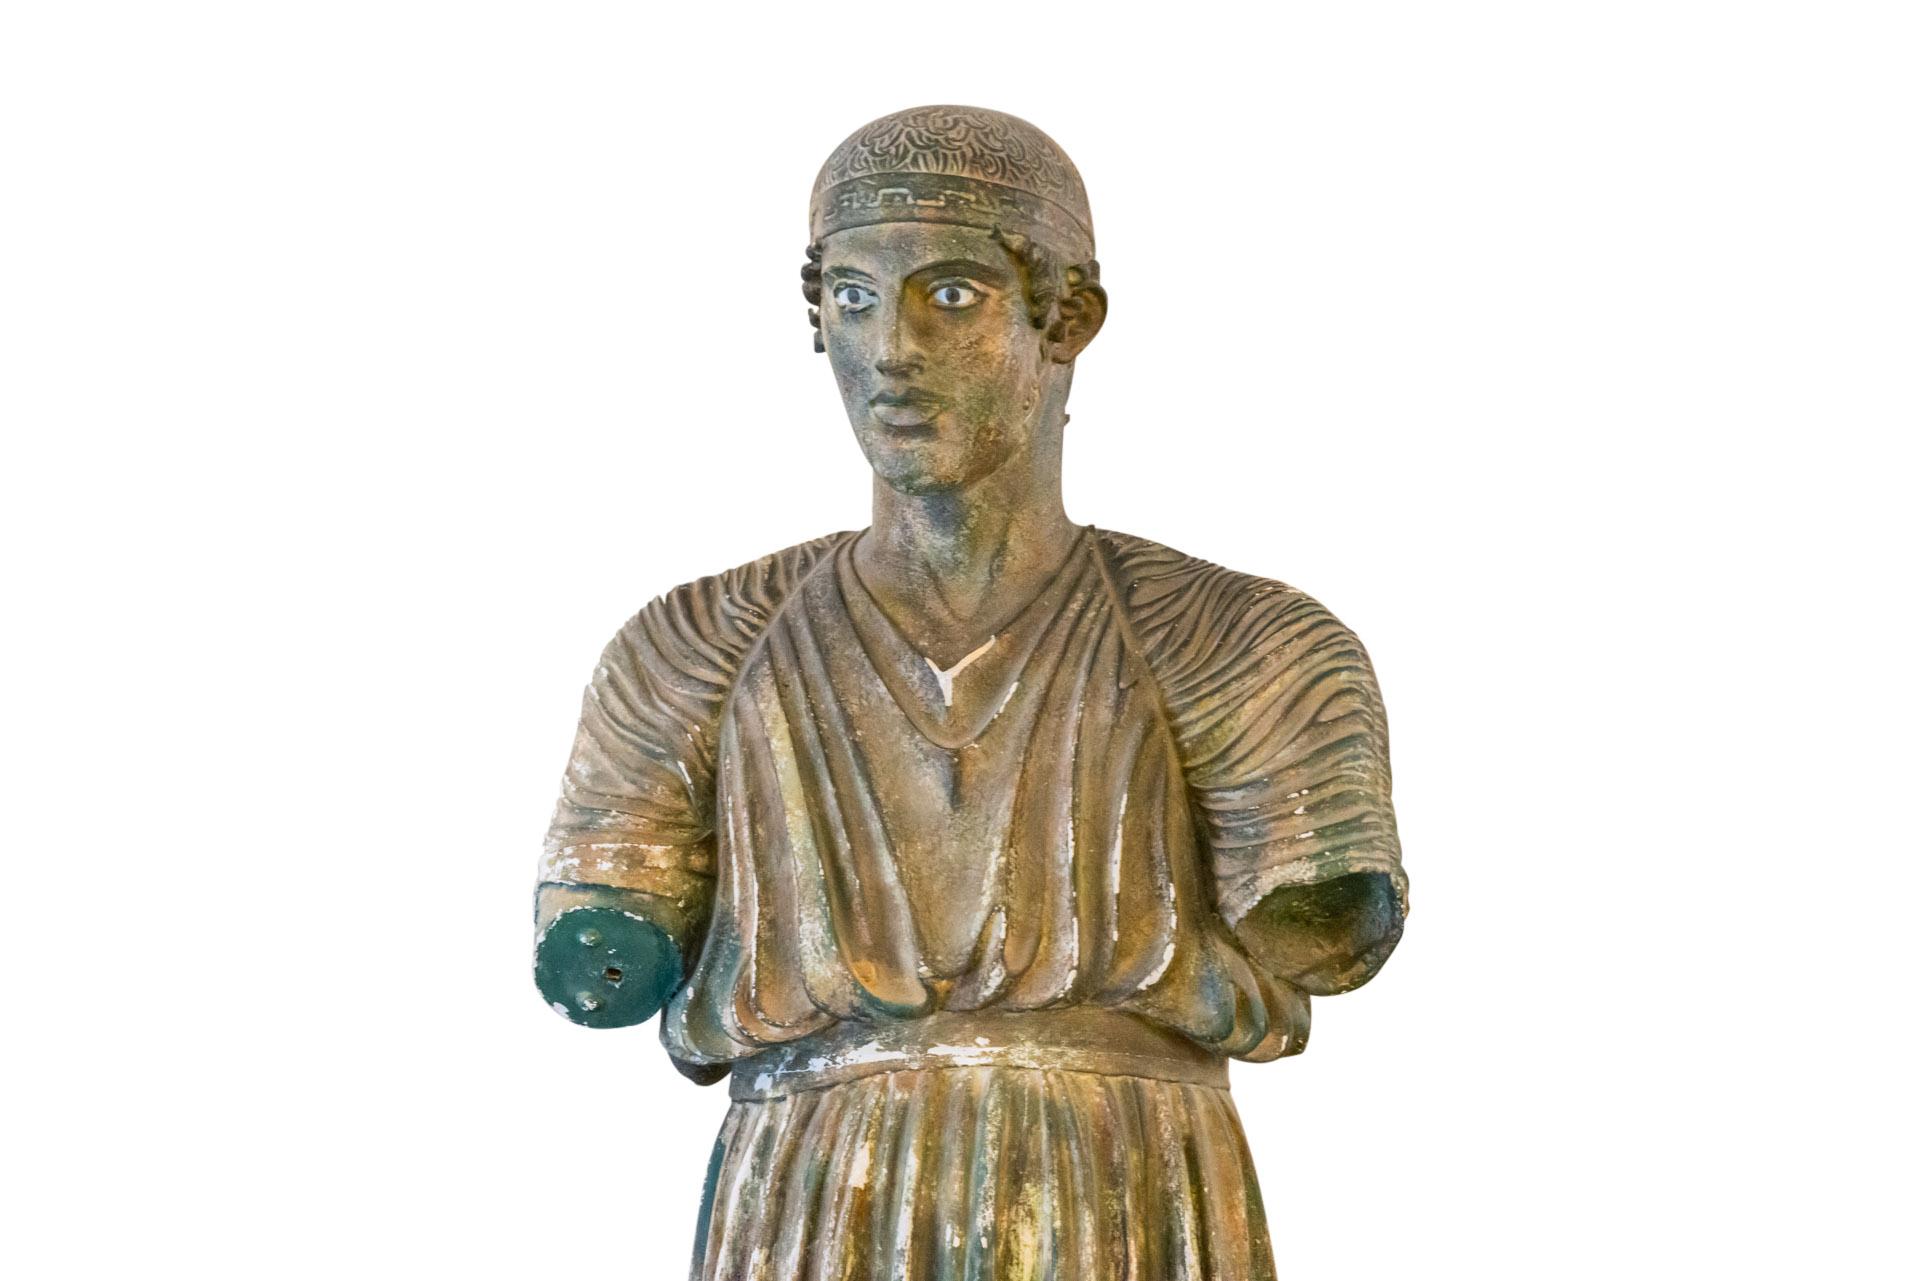 The Charioteer of Delphi, Plaster Sculpture,
Patina in the style of the Antique, reproduction of the Greek bronze,
Missing its right arm,
Vintage condition, some losses,
France, circa 1960.

Measures: Height 199 cm, Width 49 cm, Depth 40 cm.

The